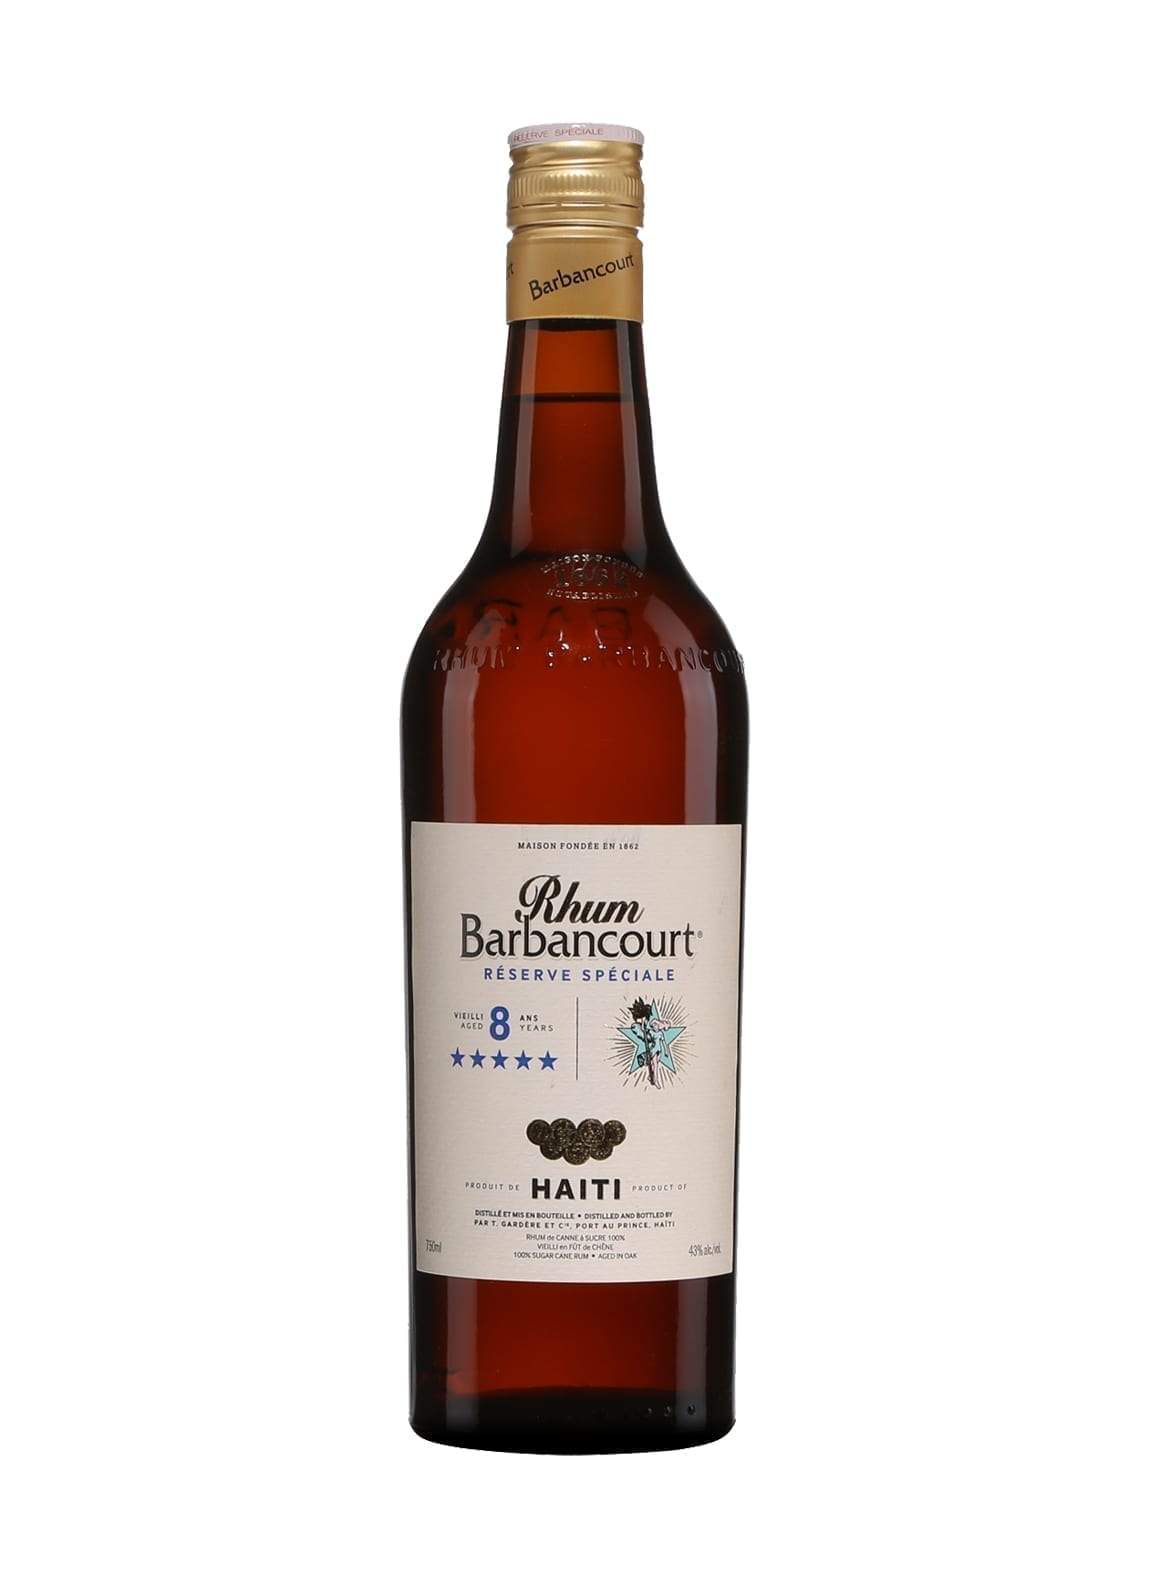 Barbancourt Extra Old Rum 8 years 5 stars 43% 750ml | Rum | Shop online at Spirits of France